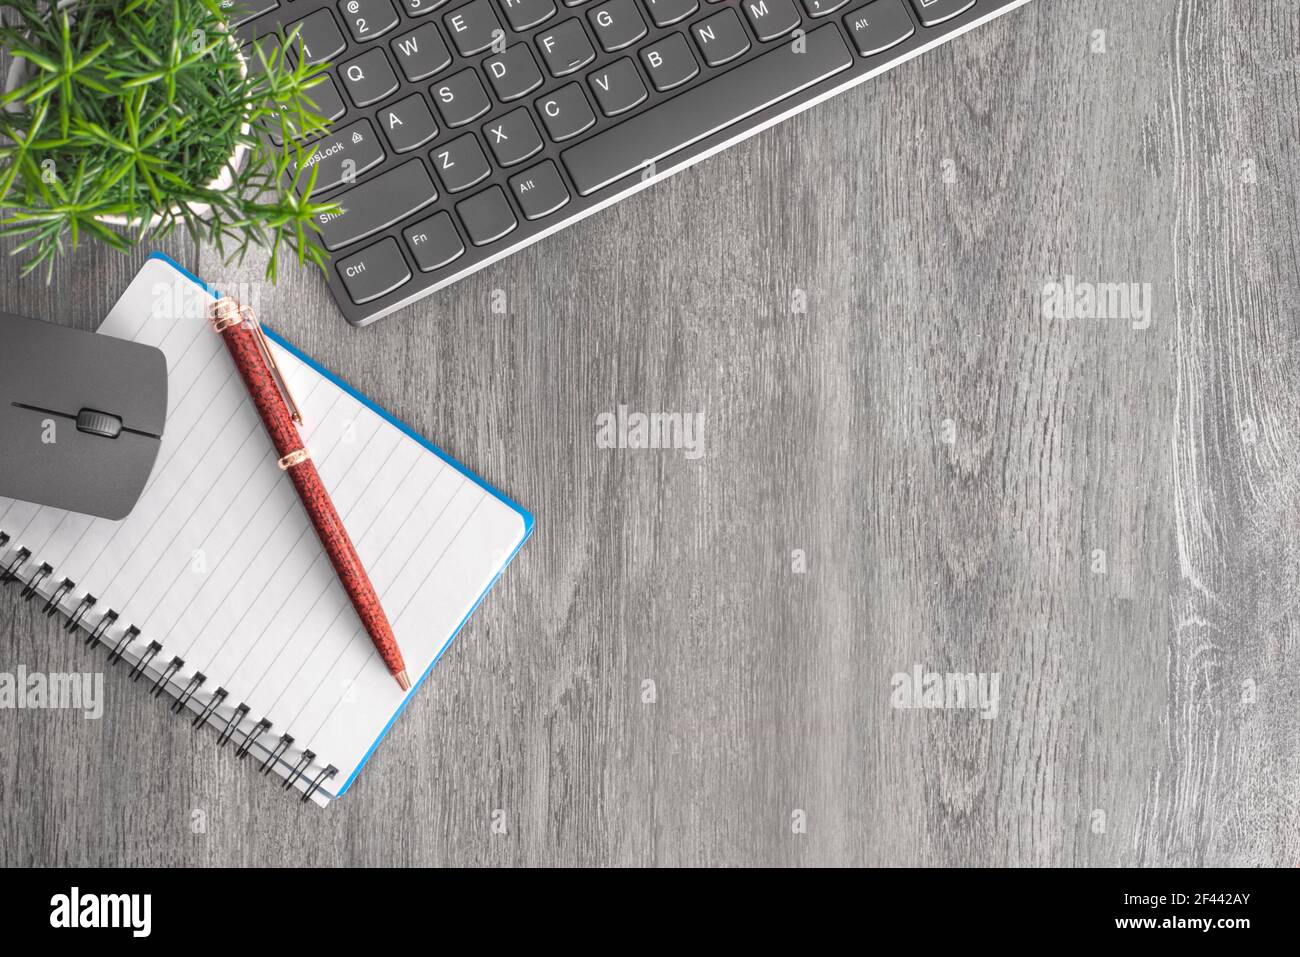 Business work place with laptop, keyboard, computer mouse , pencil and plant Stock Photo